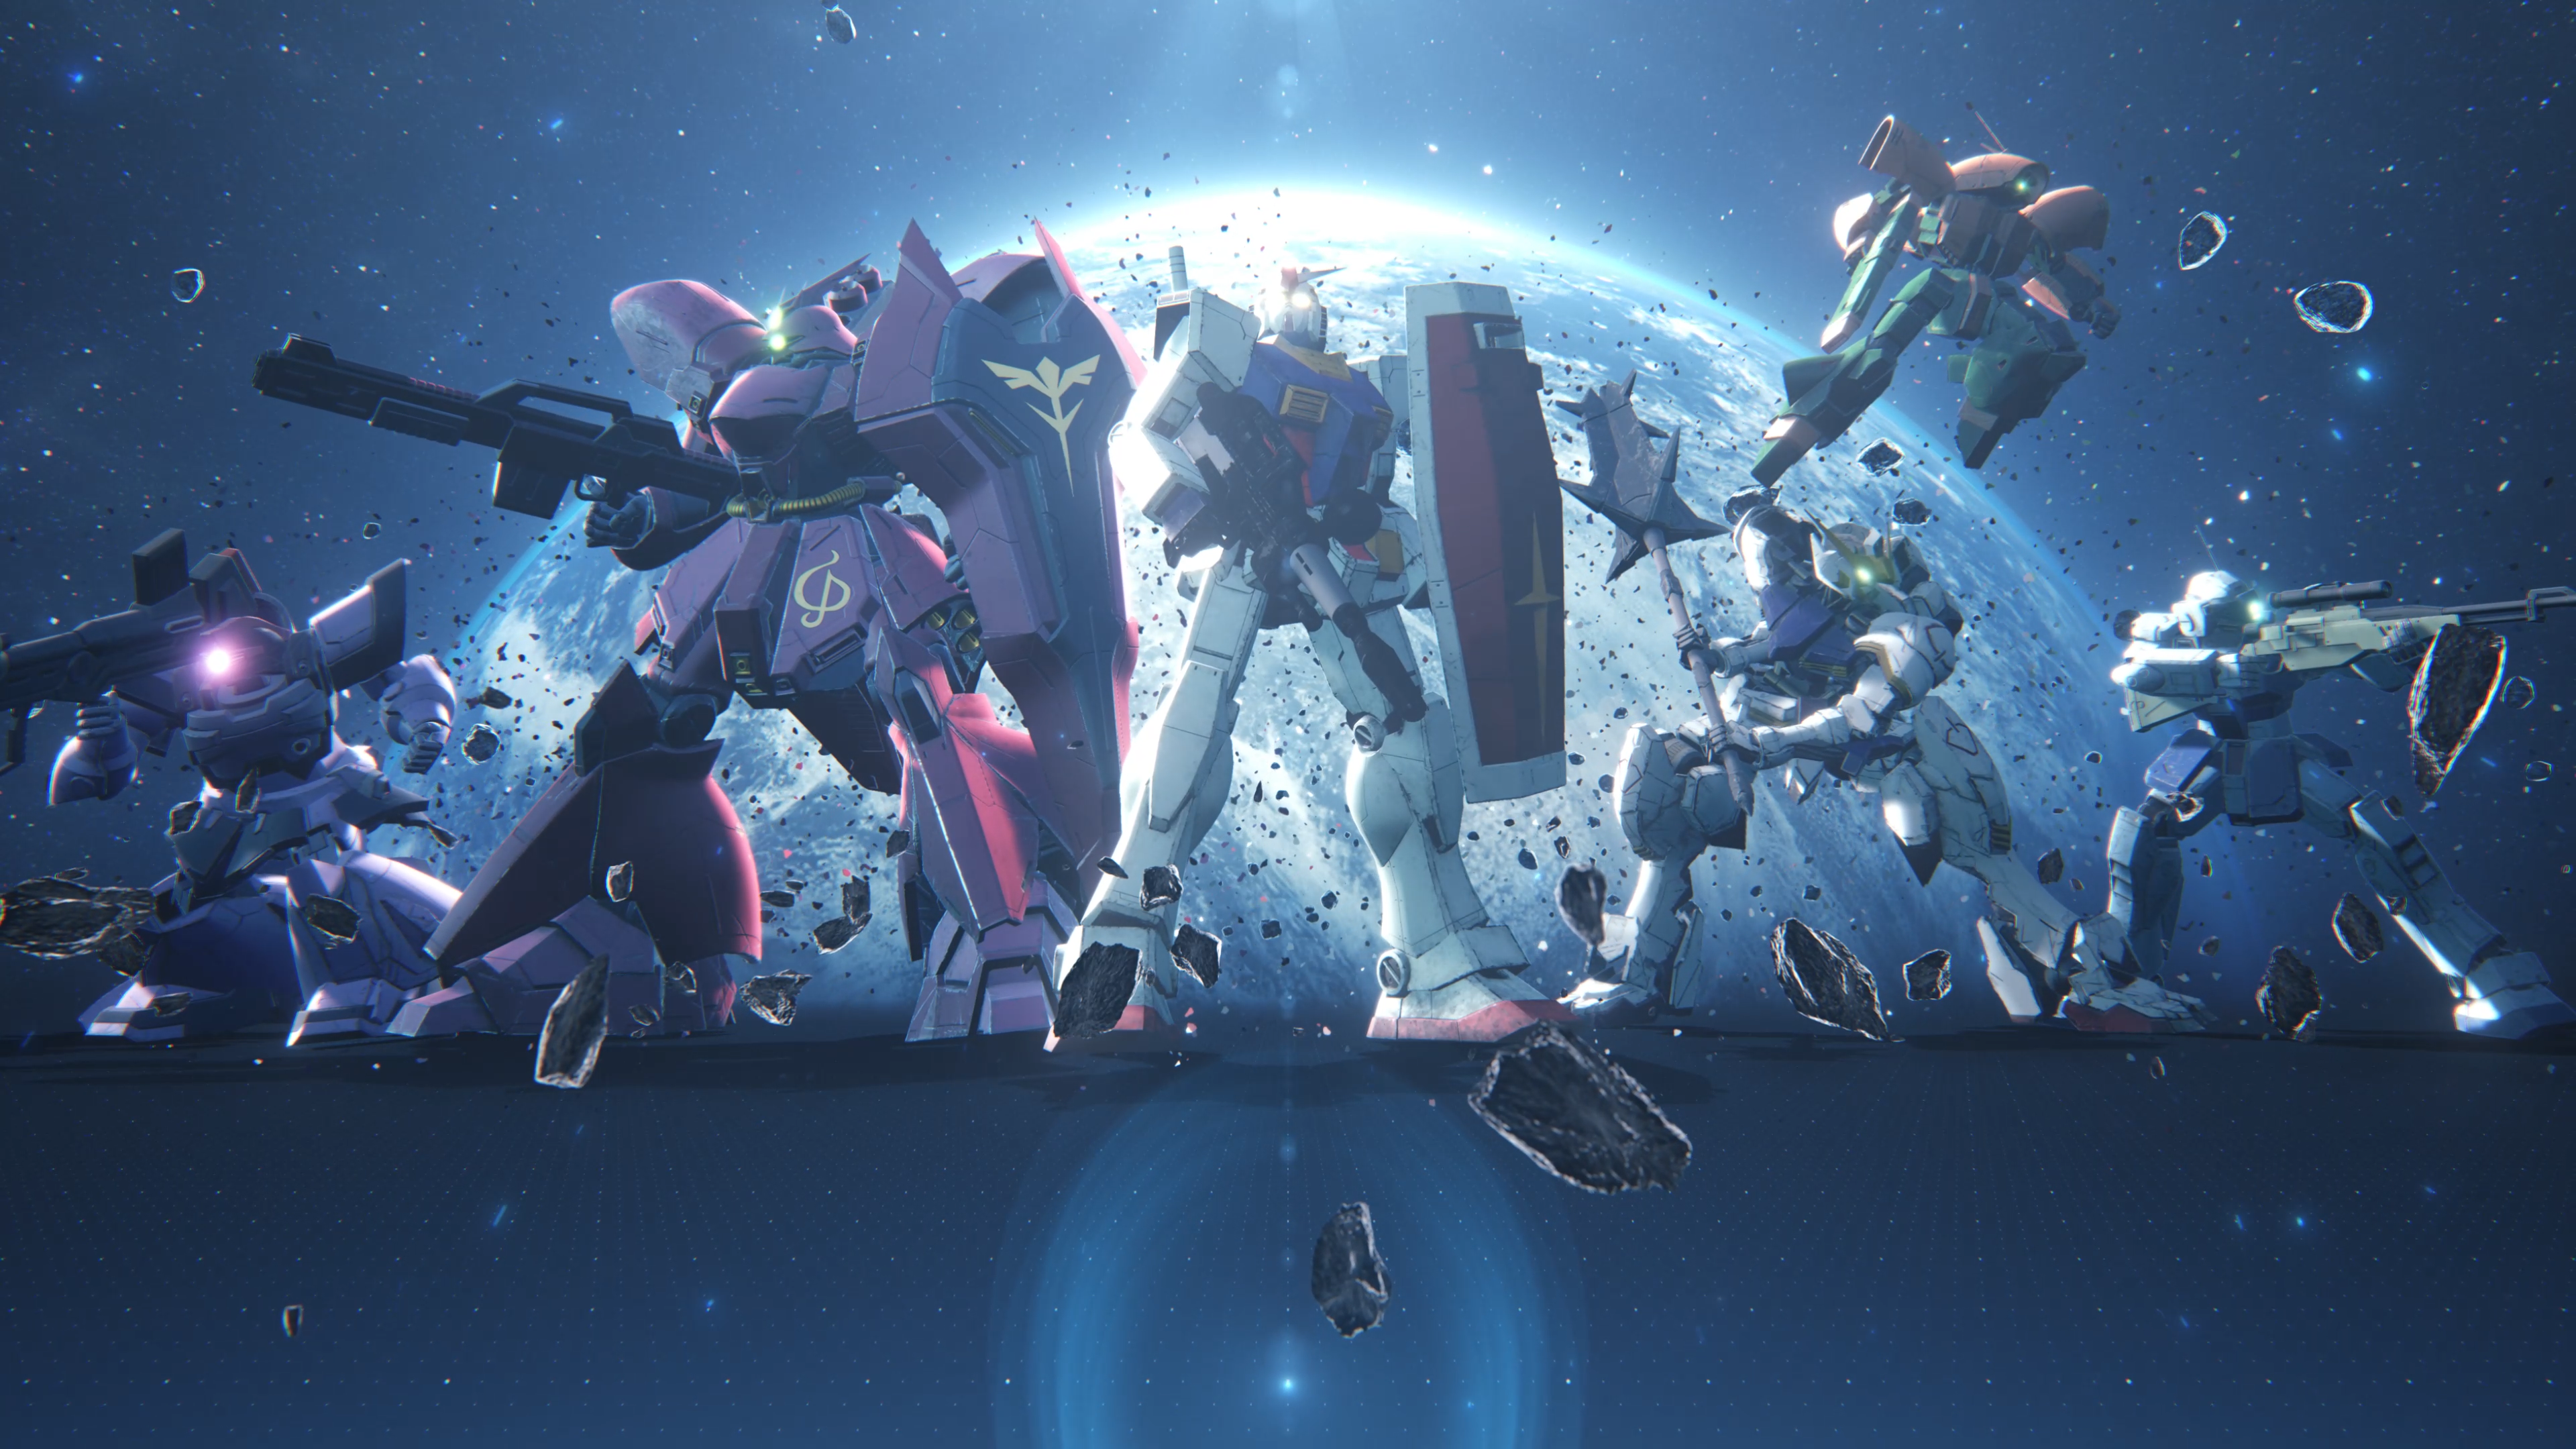 LEARN MORE ABOUT GUNDAM EVOLUTION’S SEASON 3 IGNITION UPDATE IN THIS NEW TRAILER